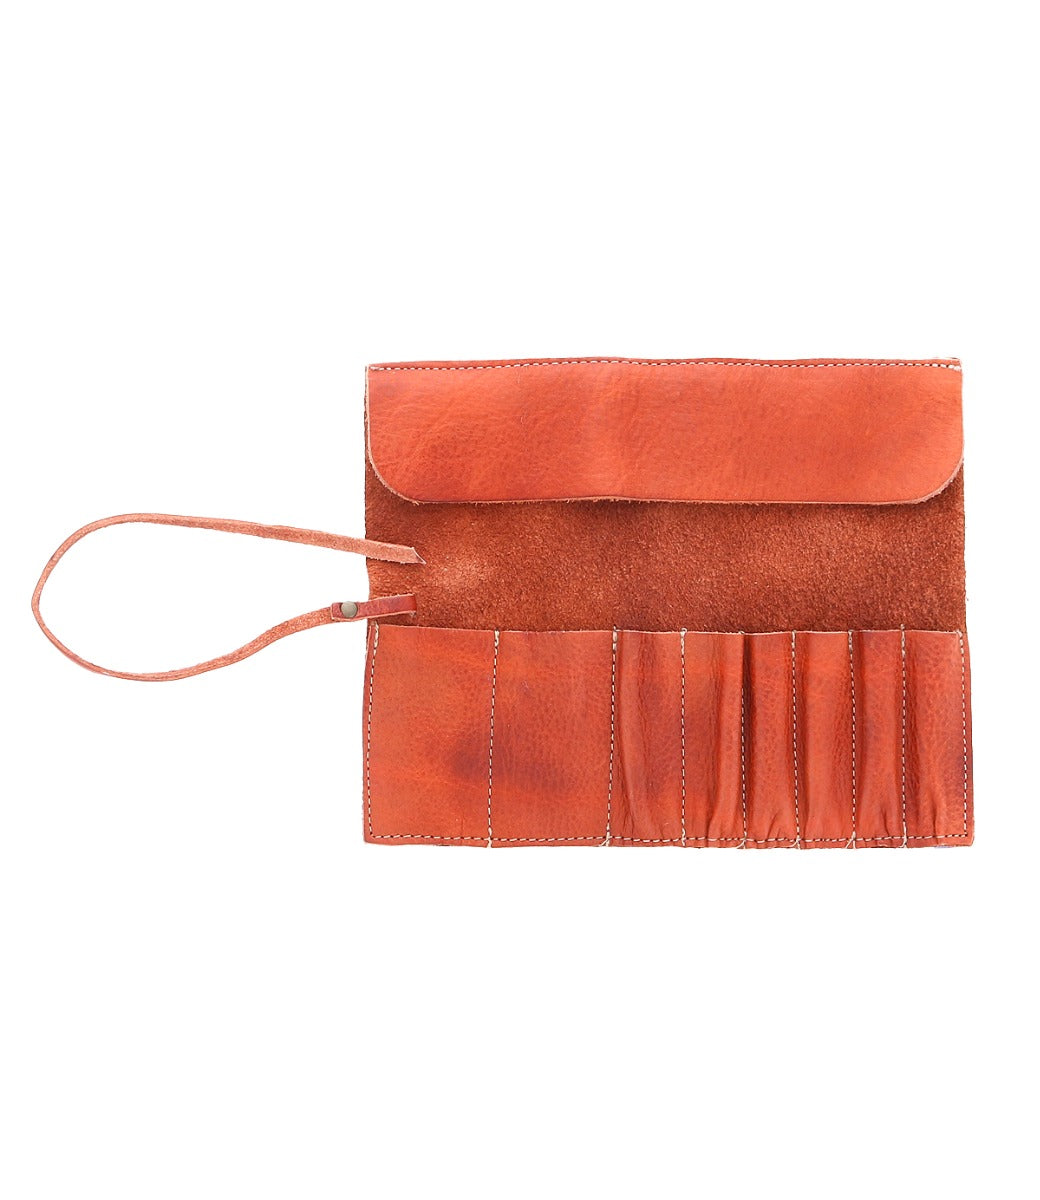 A Prepped by Bed Stu orange leather clutch bag with a handle.